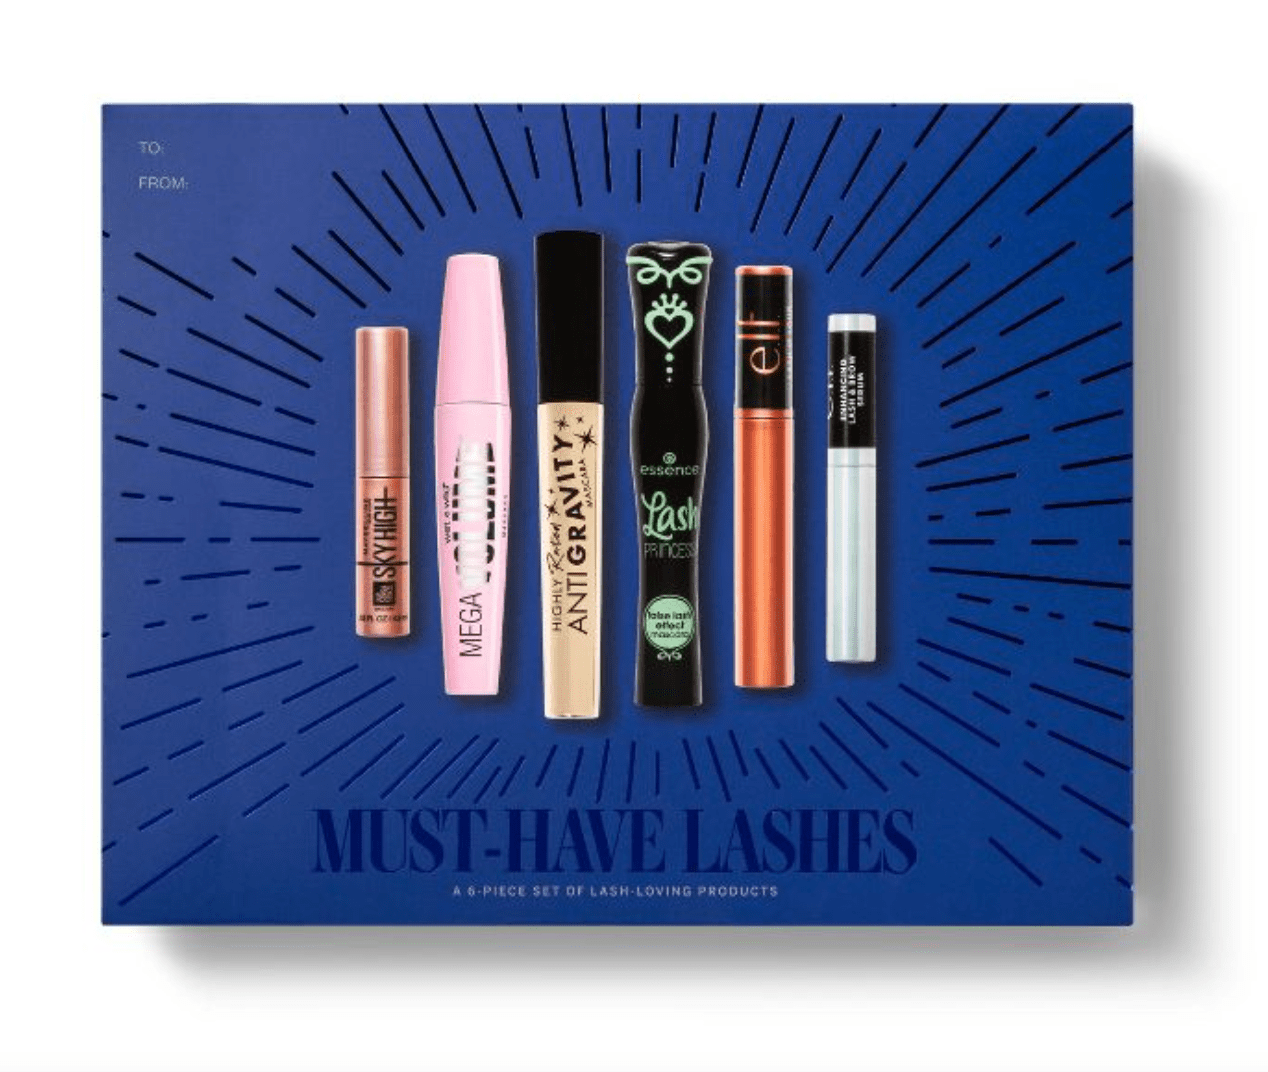 Read more about the article Target Beauty Eyelash Mascara Must Have Lashes Box